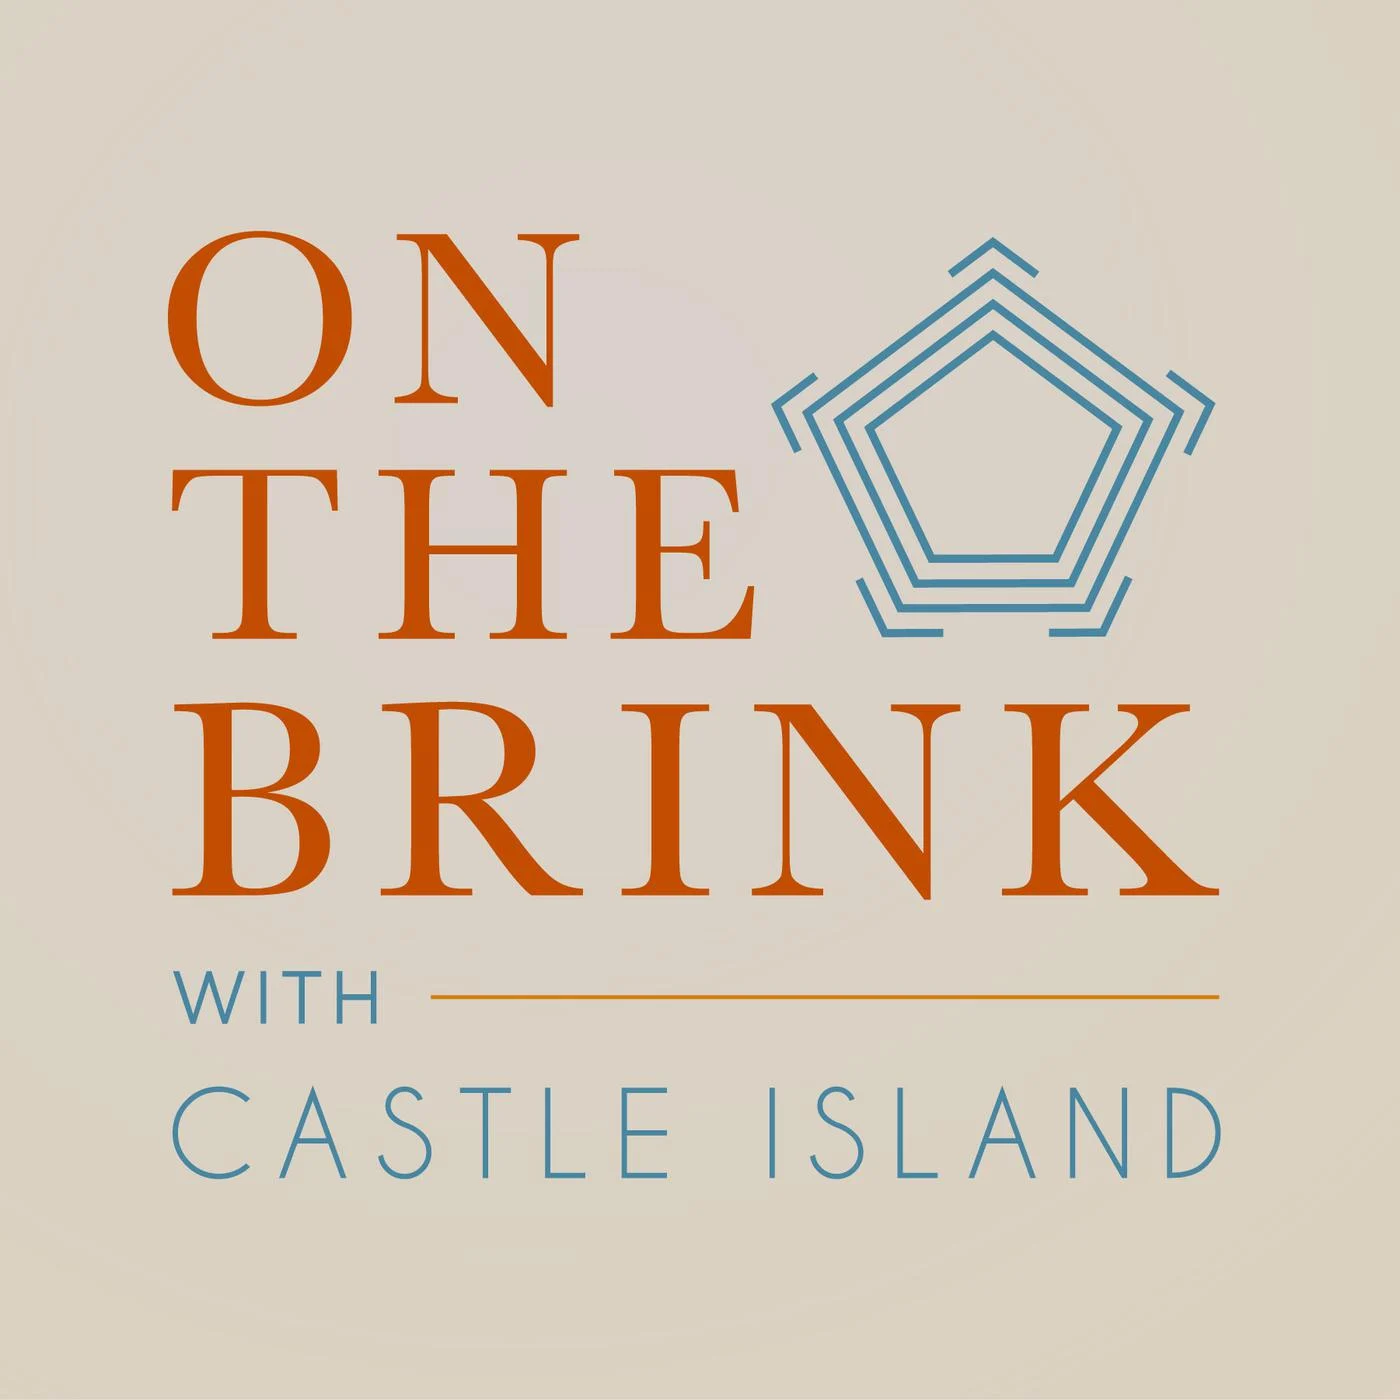 on-the-brink-with-castle-island-castle